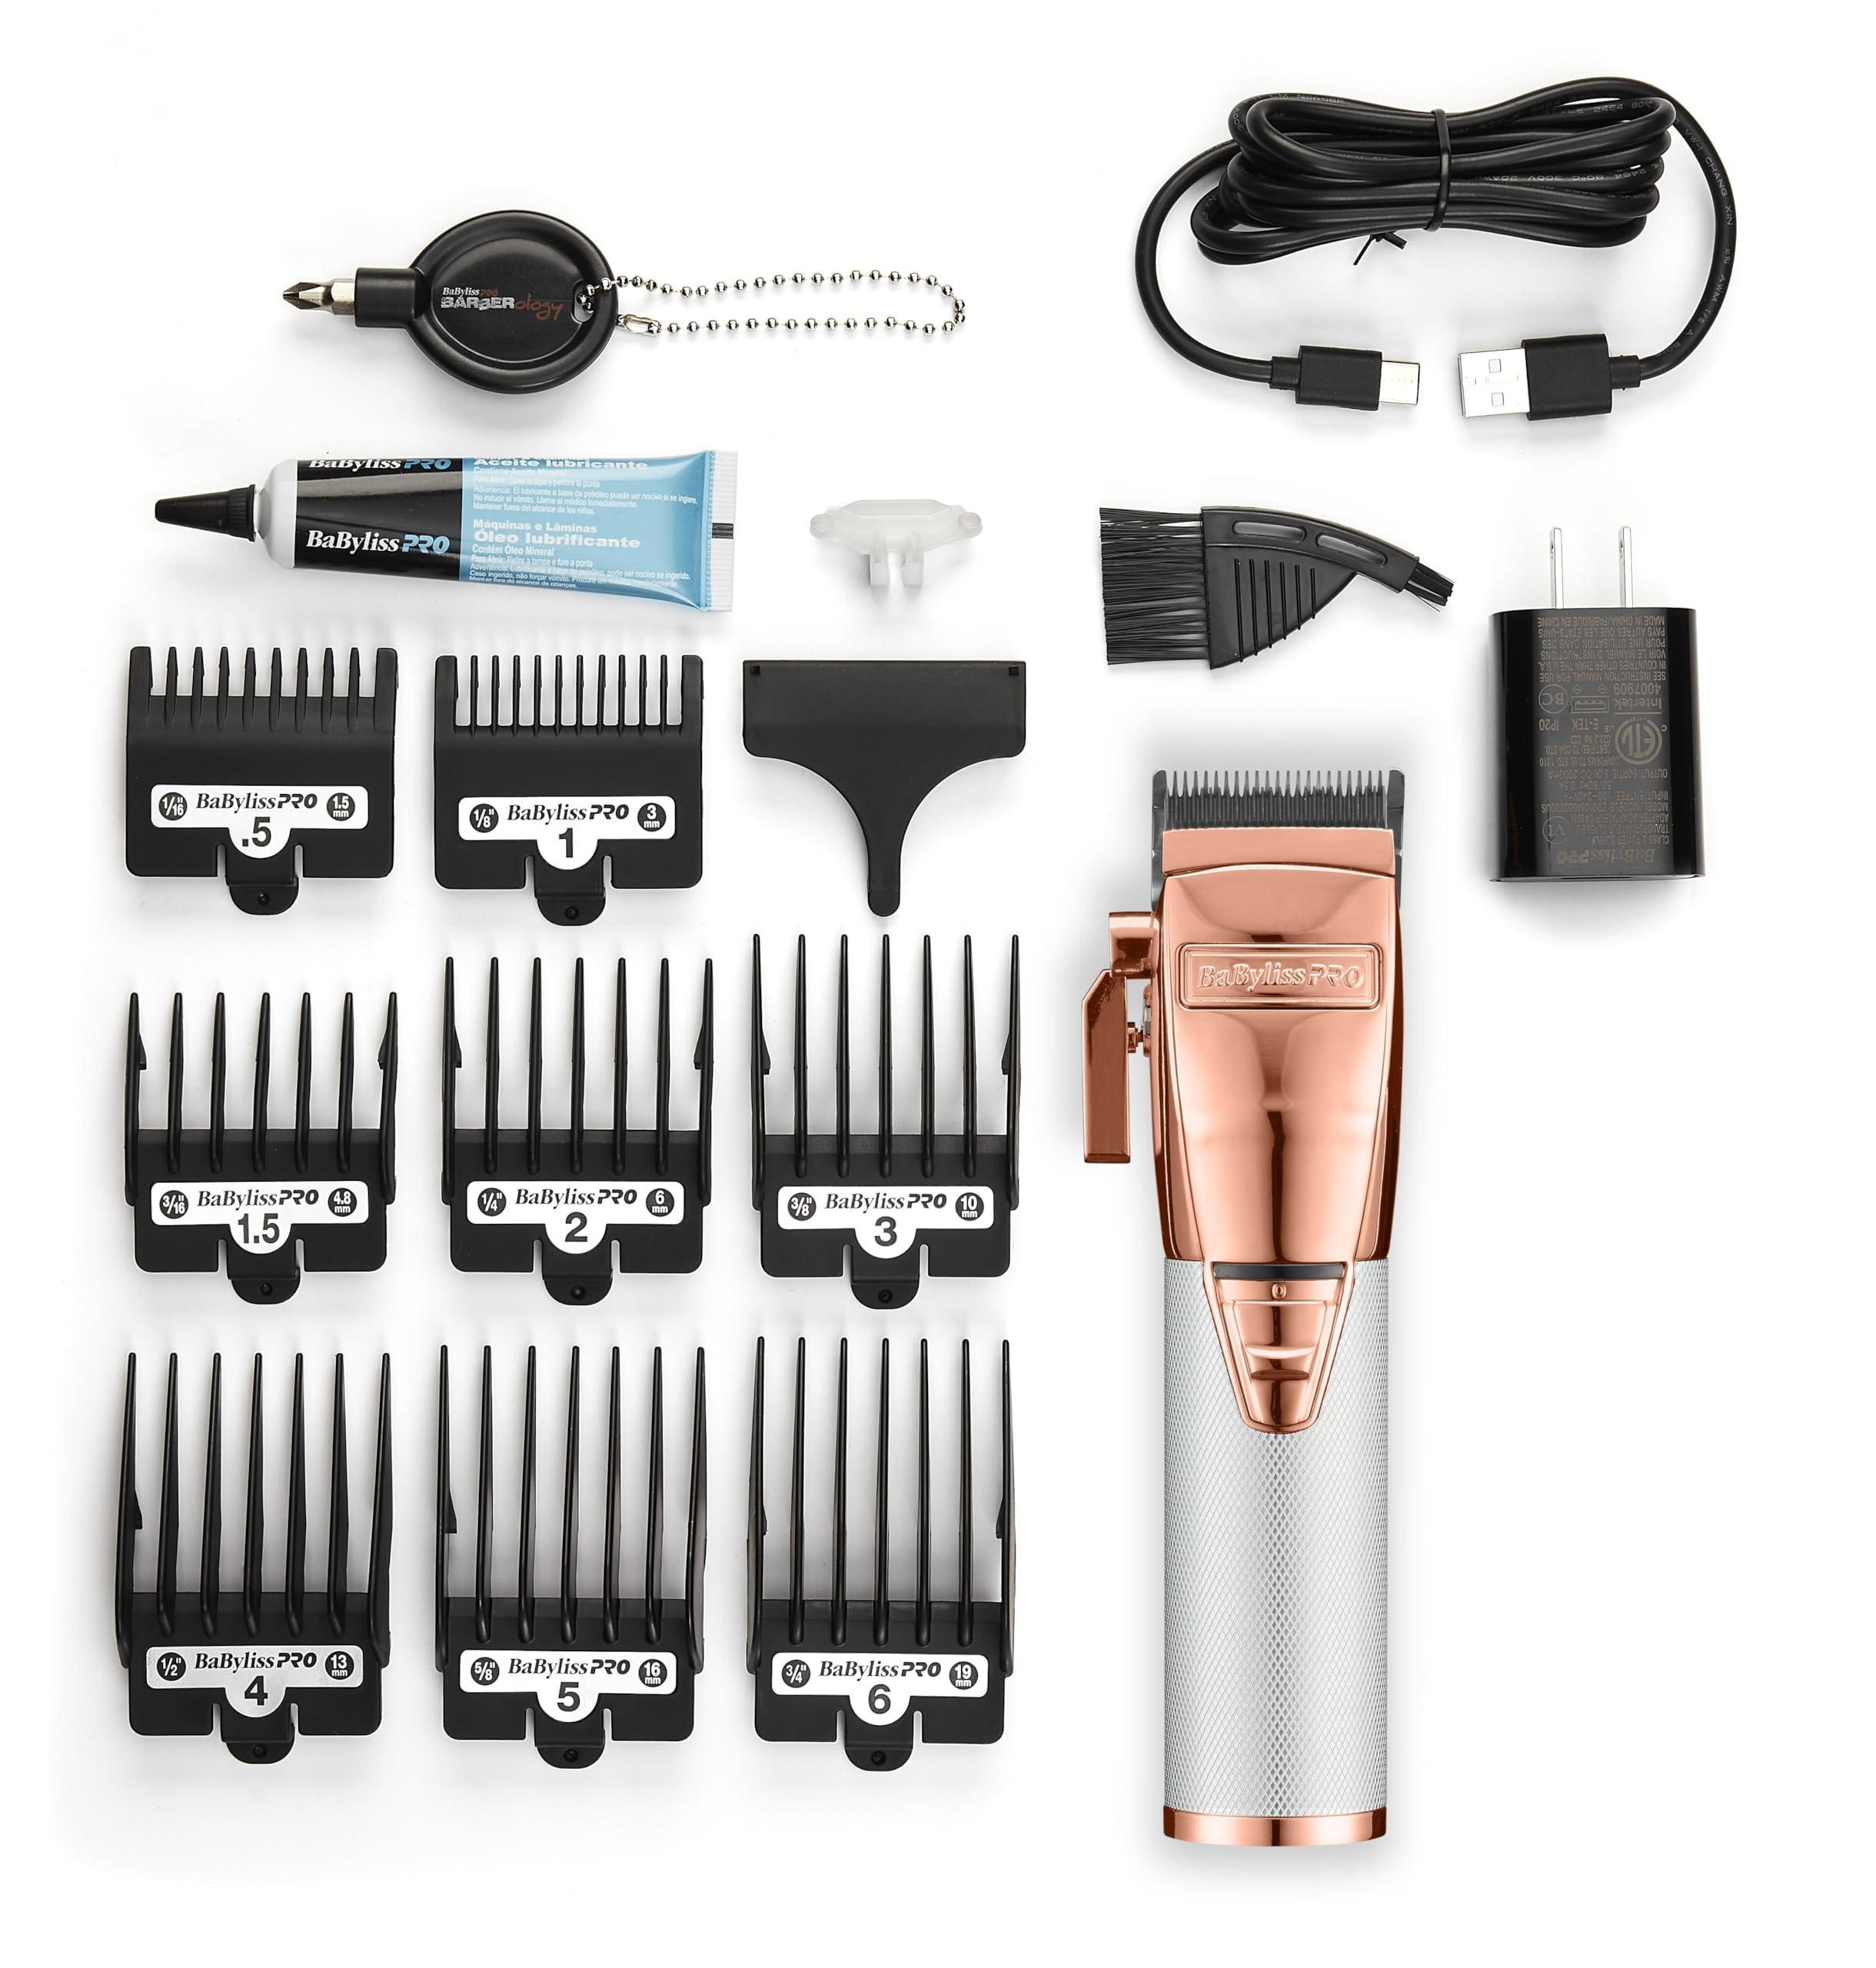 BaBylissPRO FX+ and Boost+ Professional Cord/Cordless Clippers